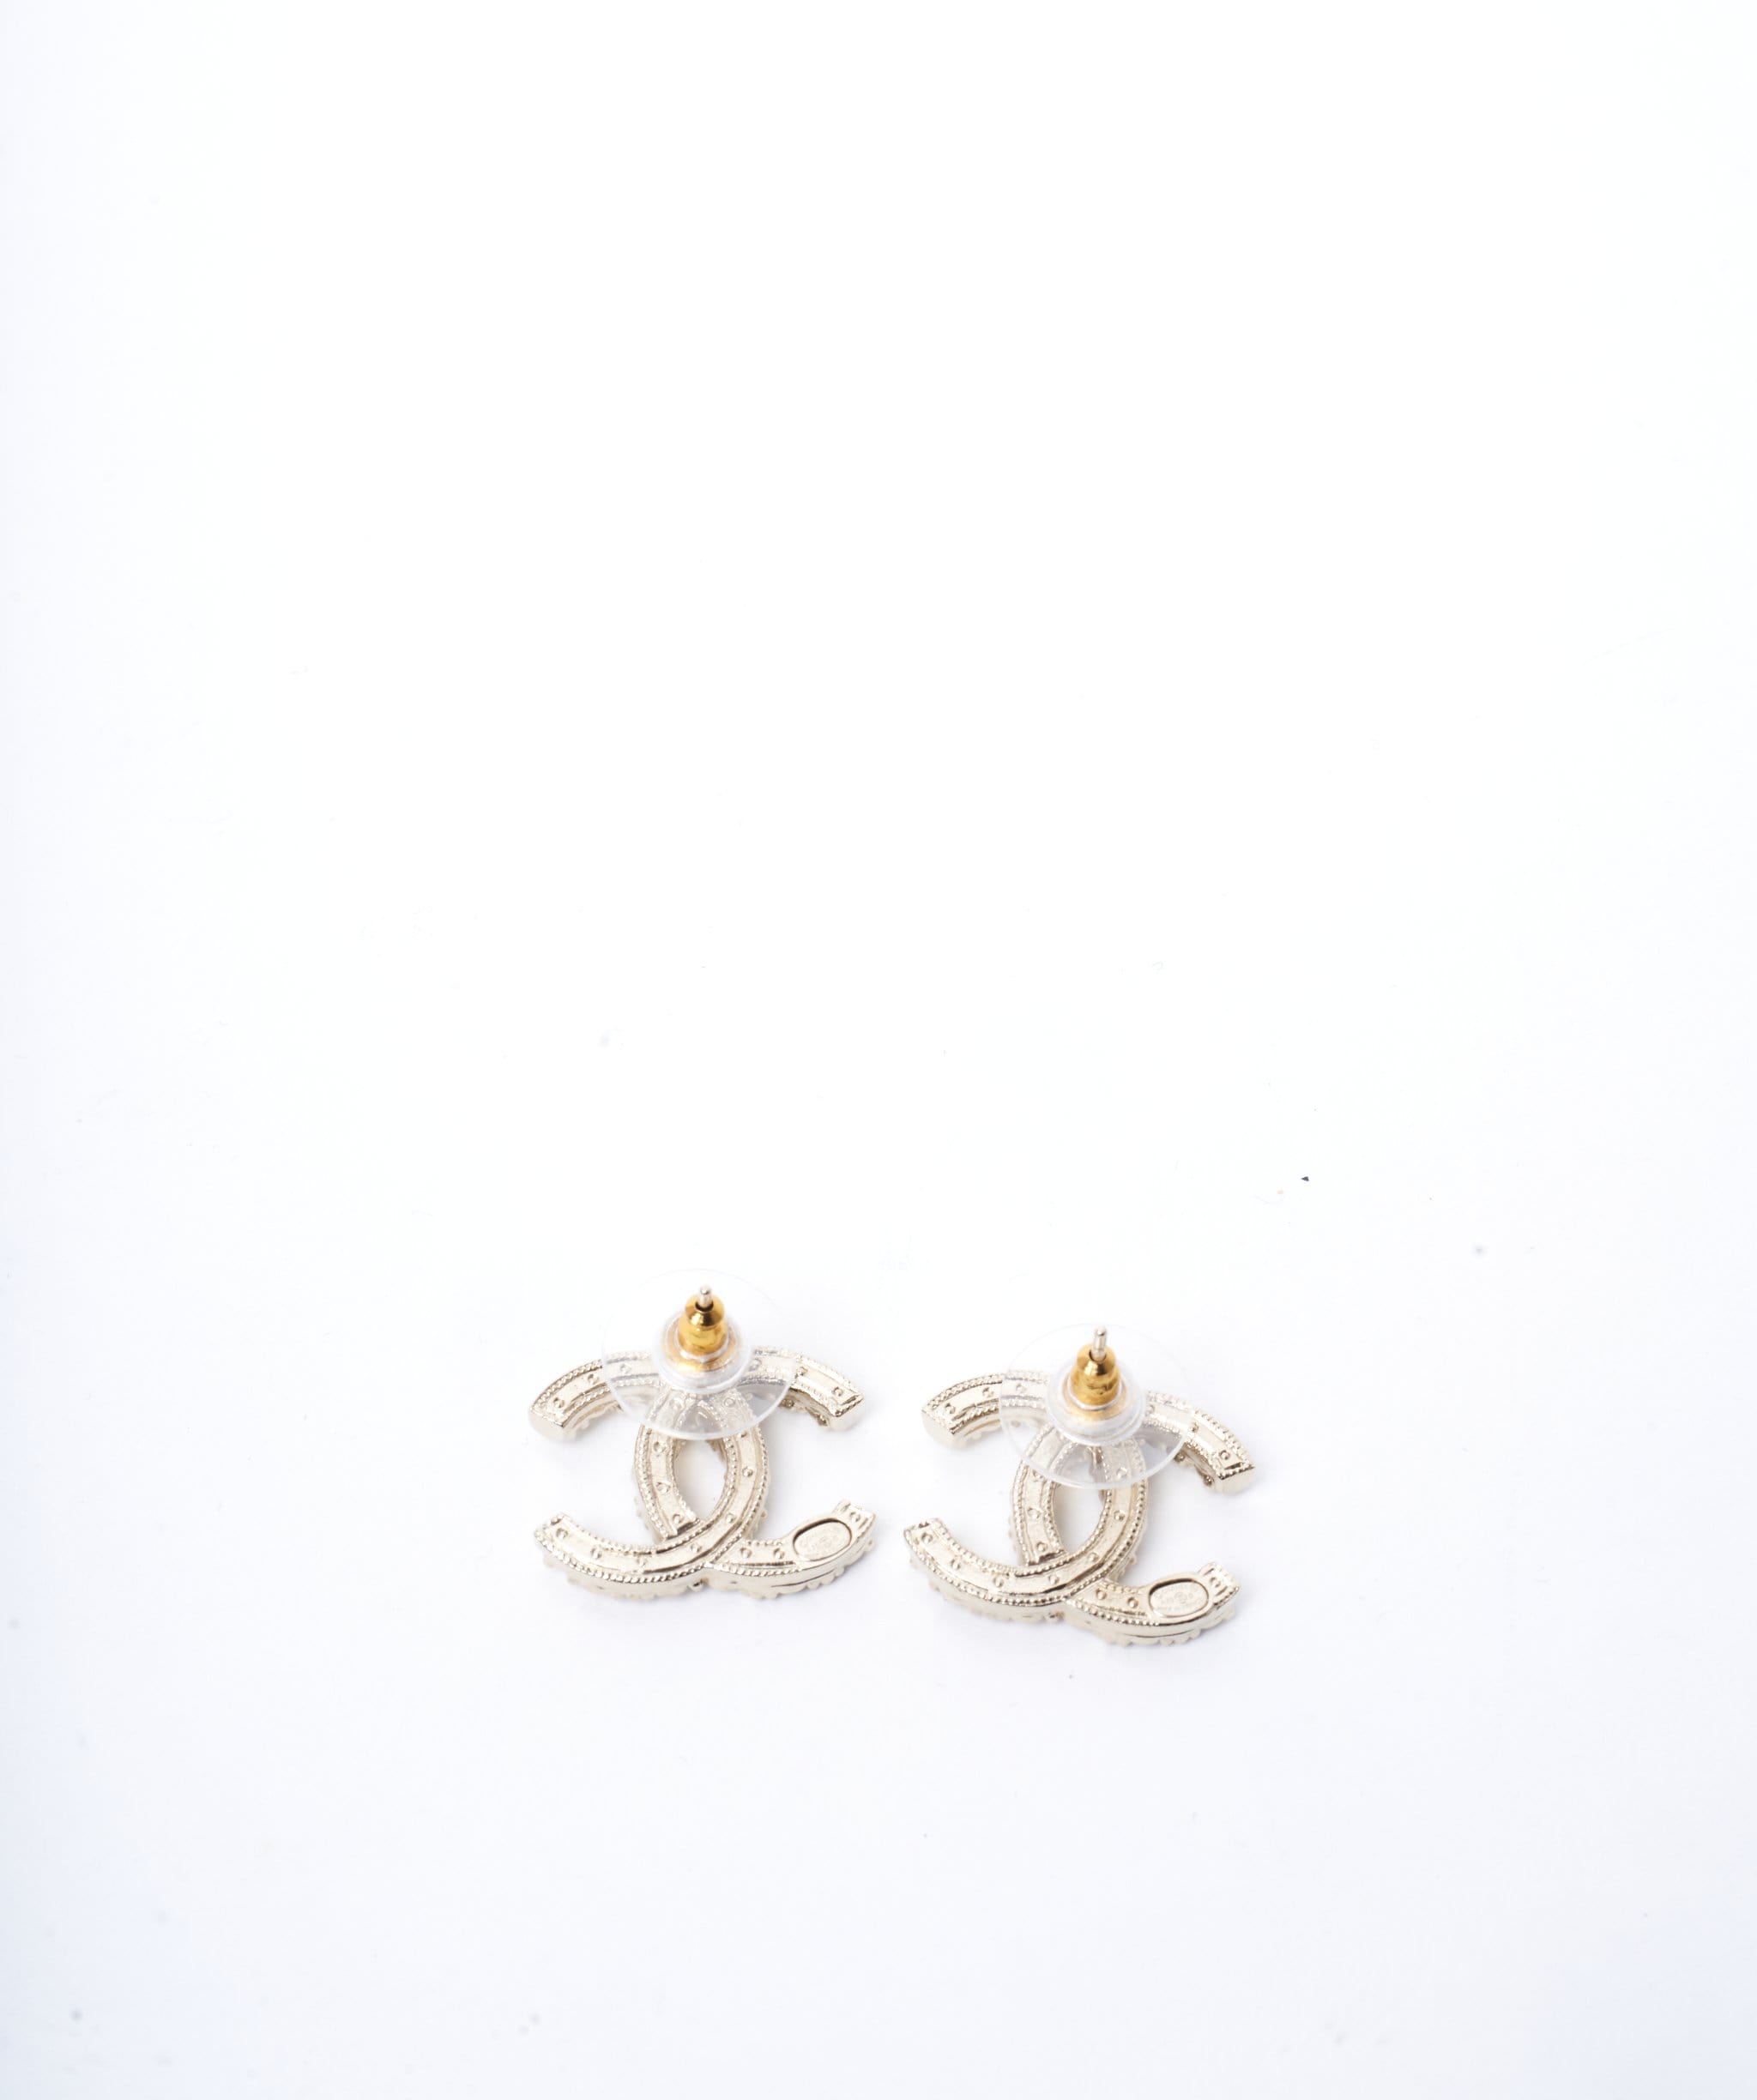 Chanel Large Chanel CC earrings in yellow gold, pearl and crystal